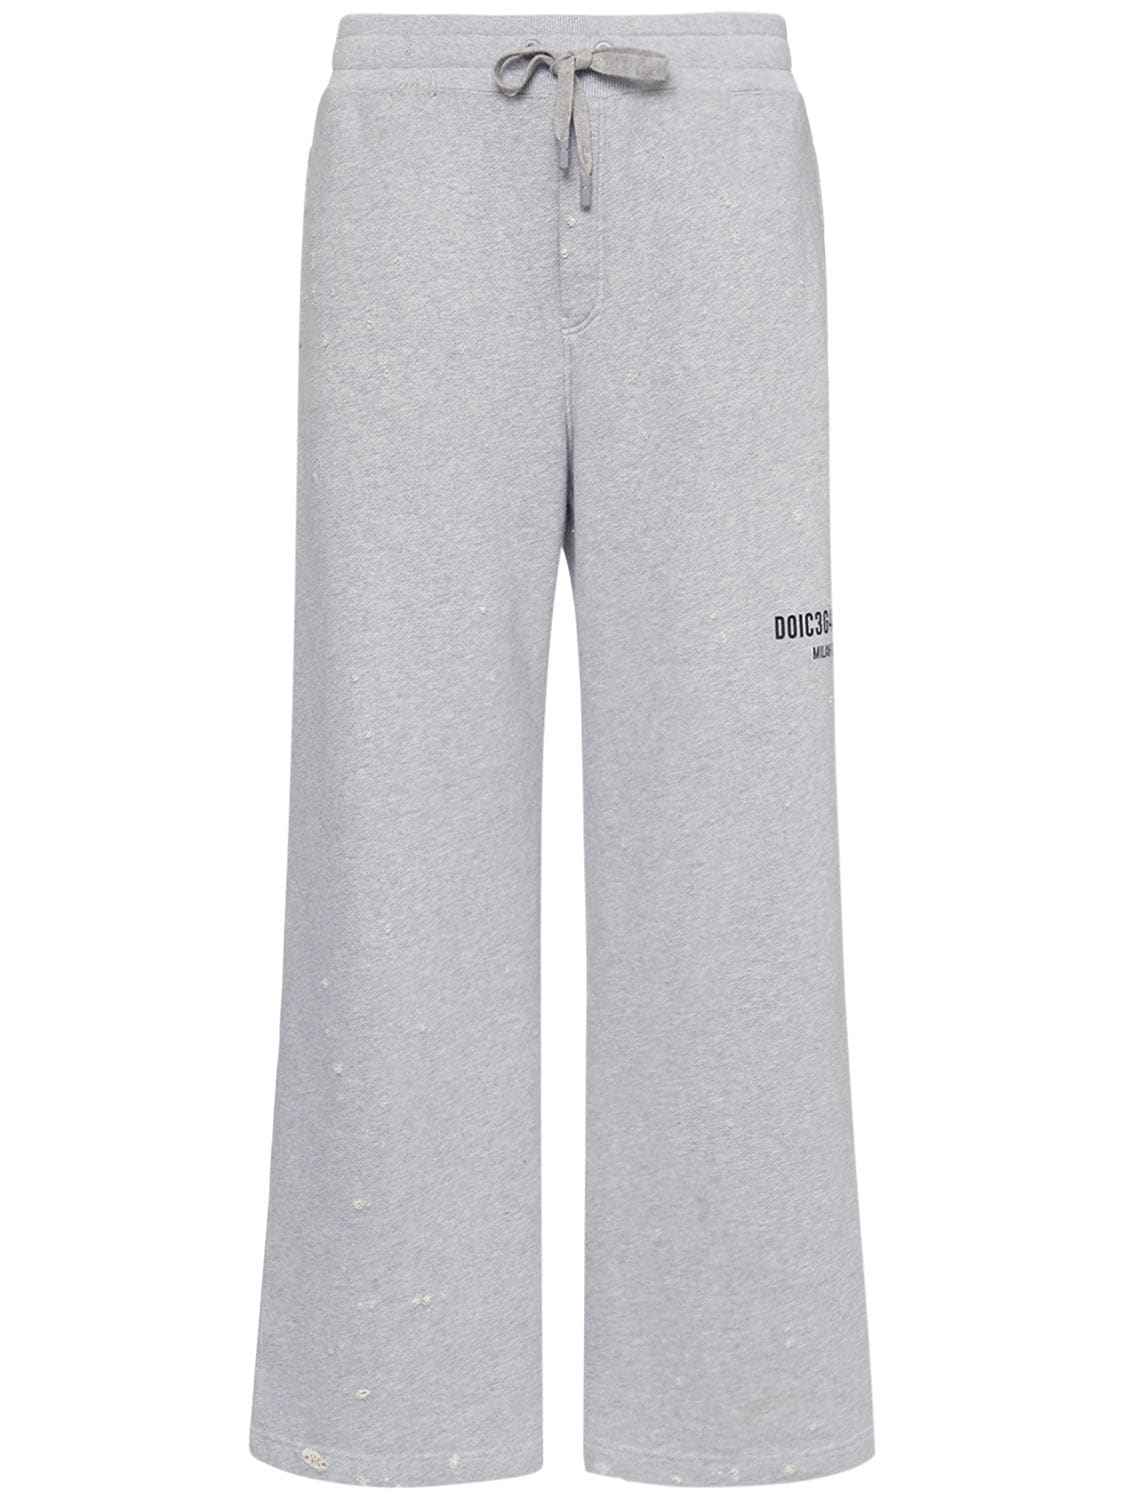 Dolce & Gabbana Distressed Cotton Jersey Jogging Trousers In Melange_grey